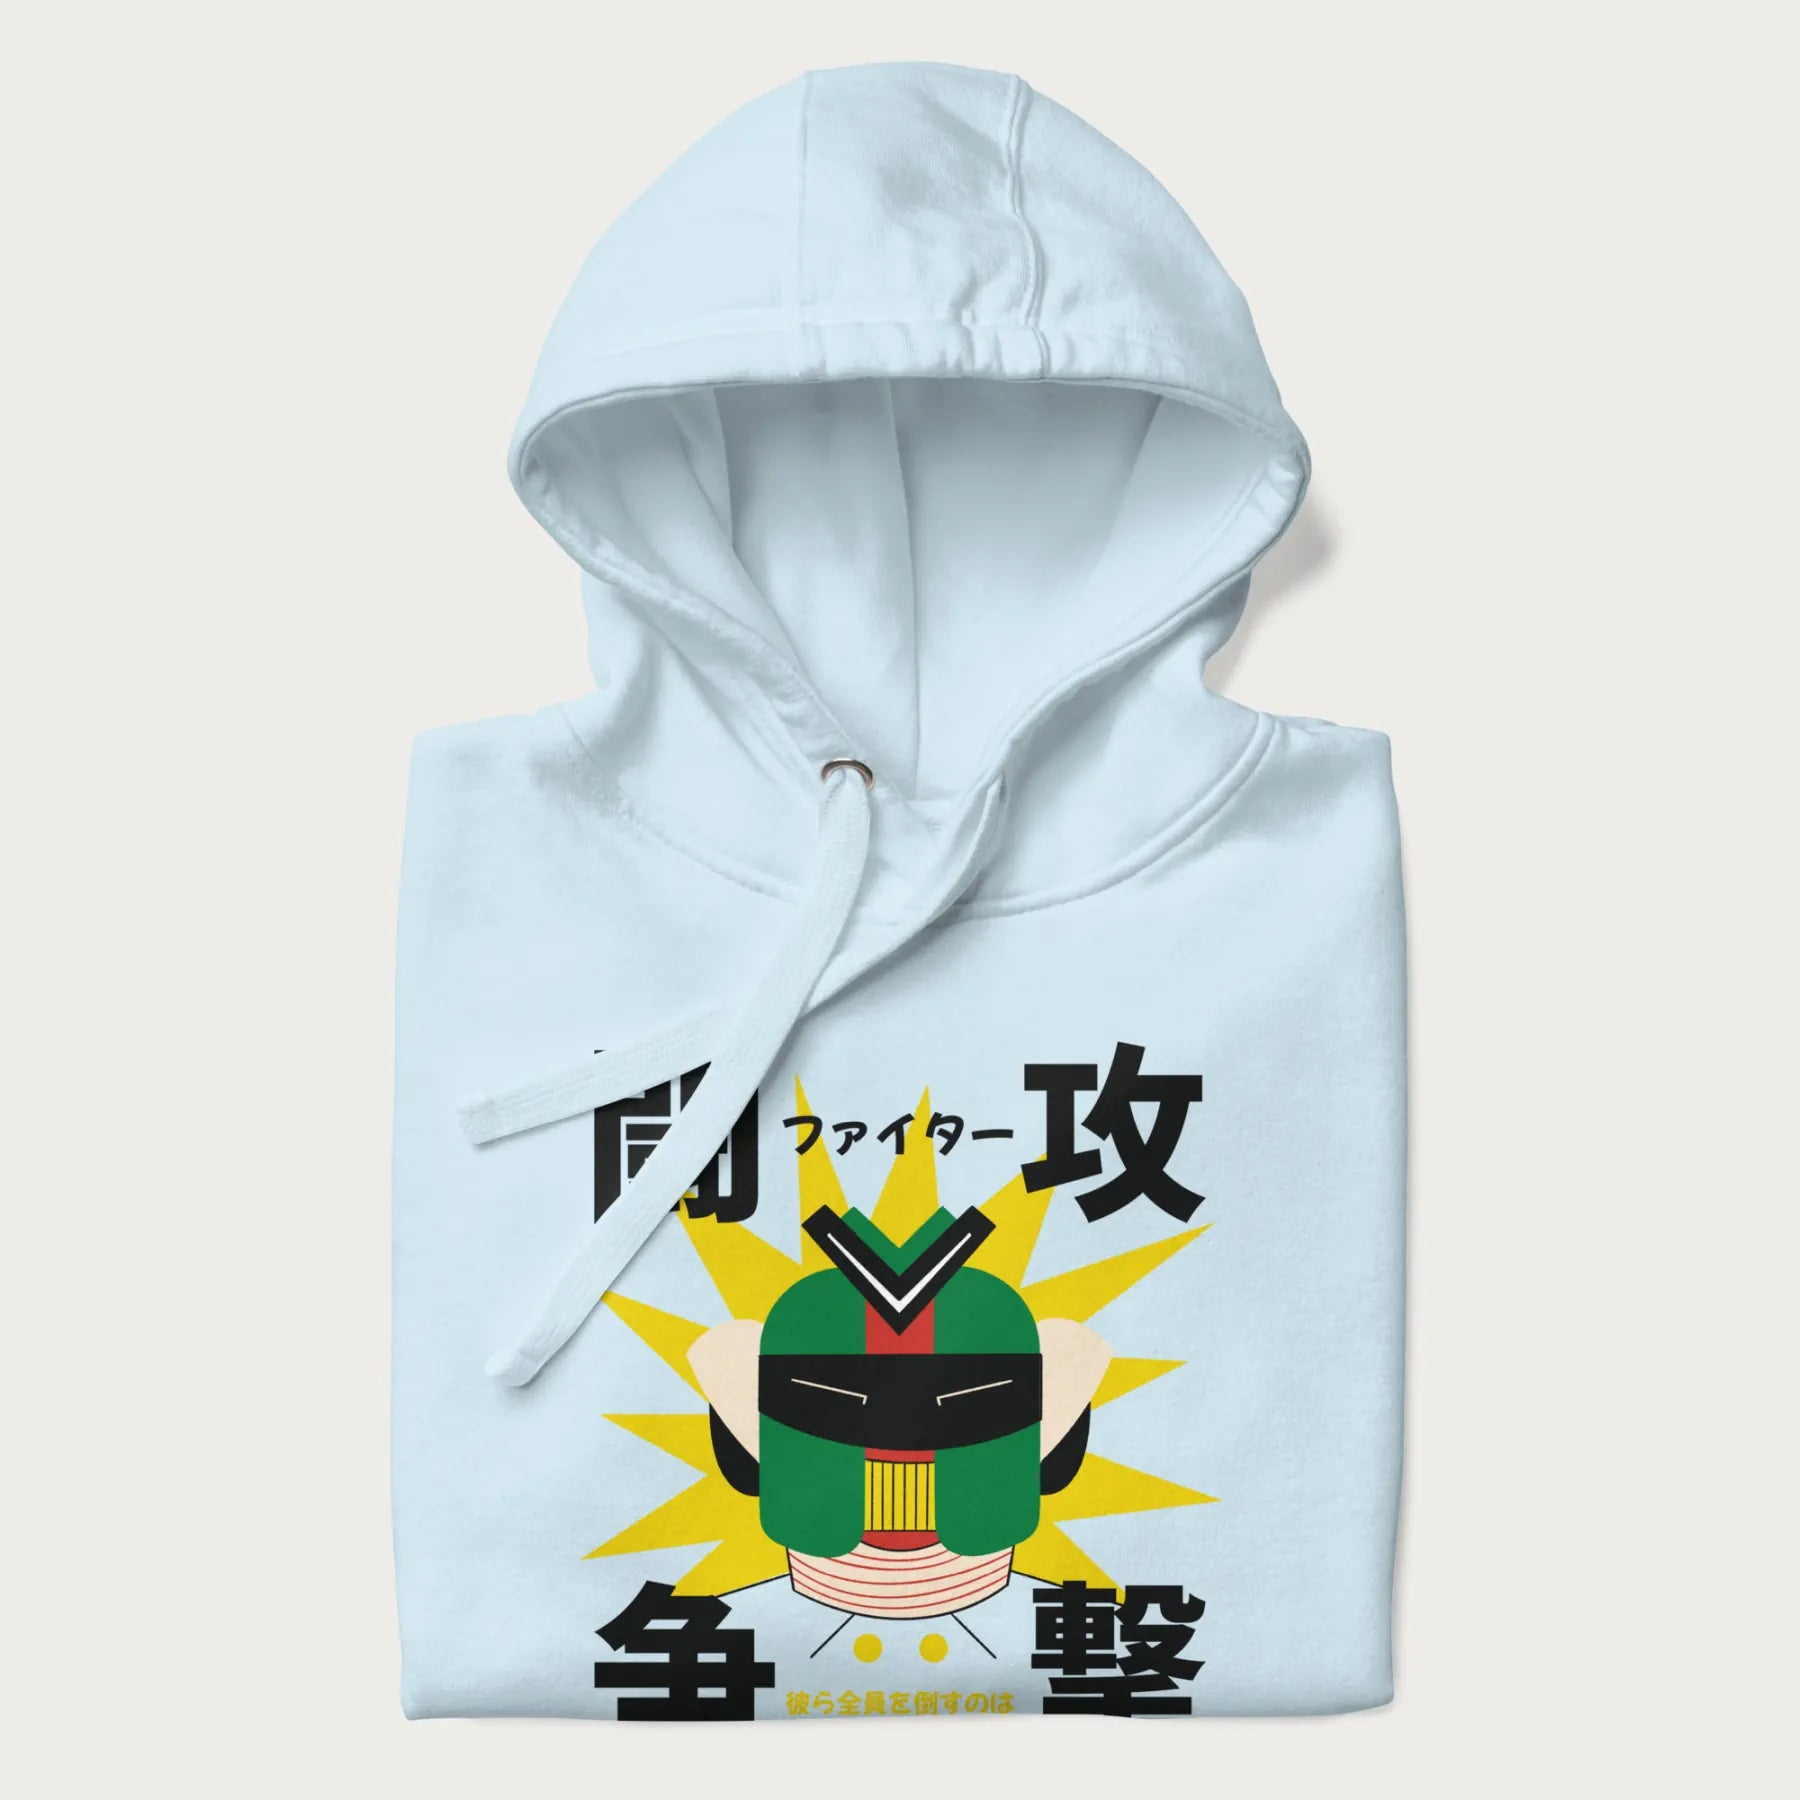 Folded light blue hoodie with retro graphic of a mecha warrior and Japanese text for "Fight," "Attack," "Conflict," and "Destiny to defeat them all".